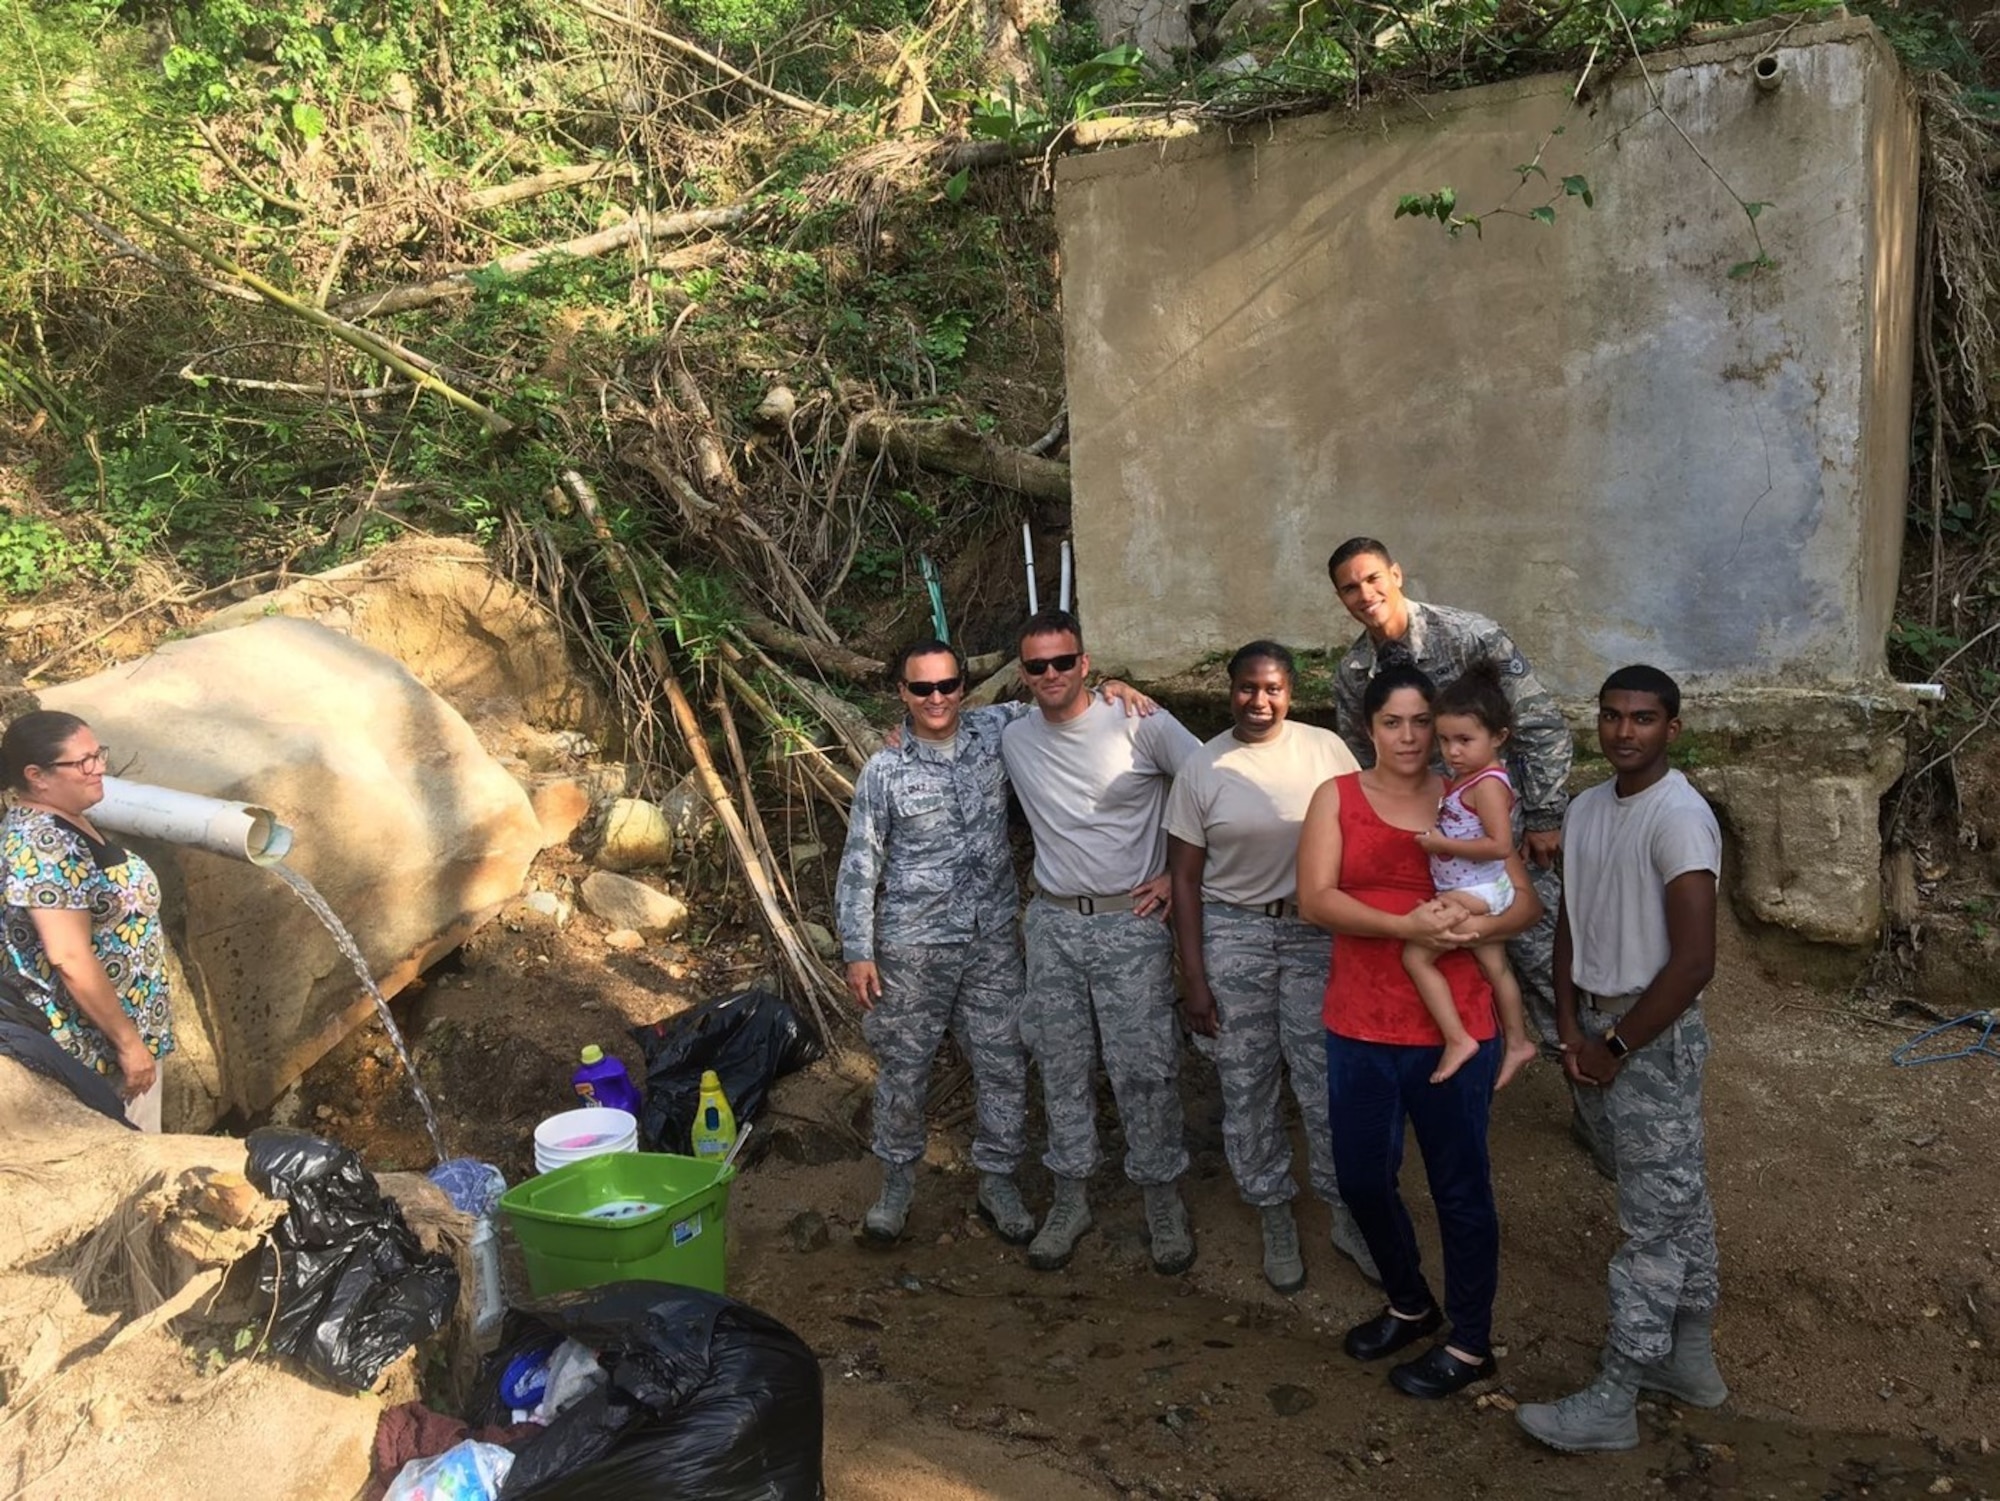 An emergency relief team poses for a photo in Puerto Rico on Oct. 28, 2017. (Courtesy photo)